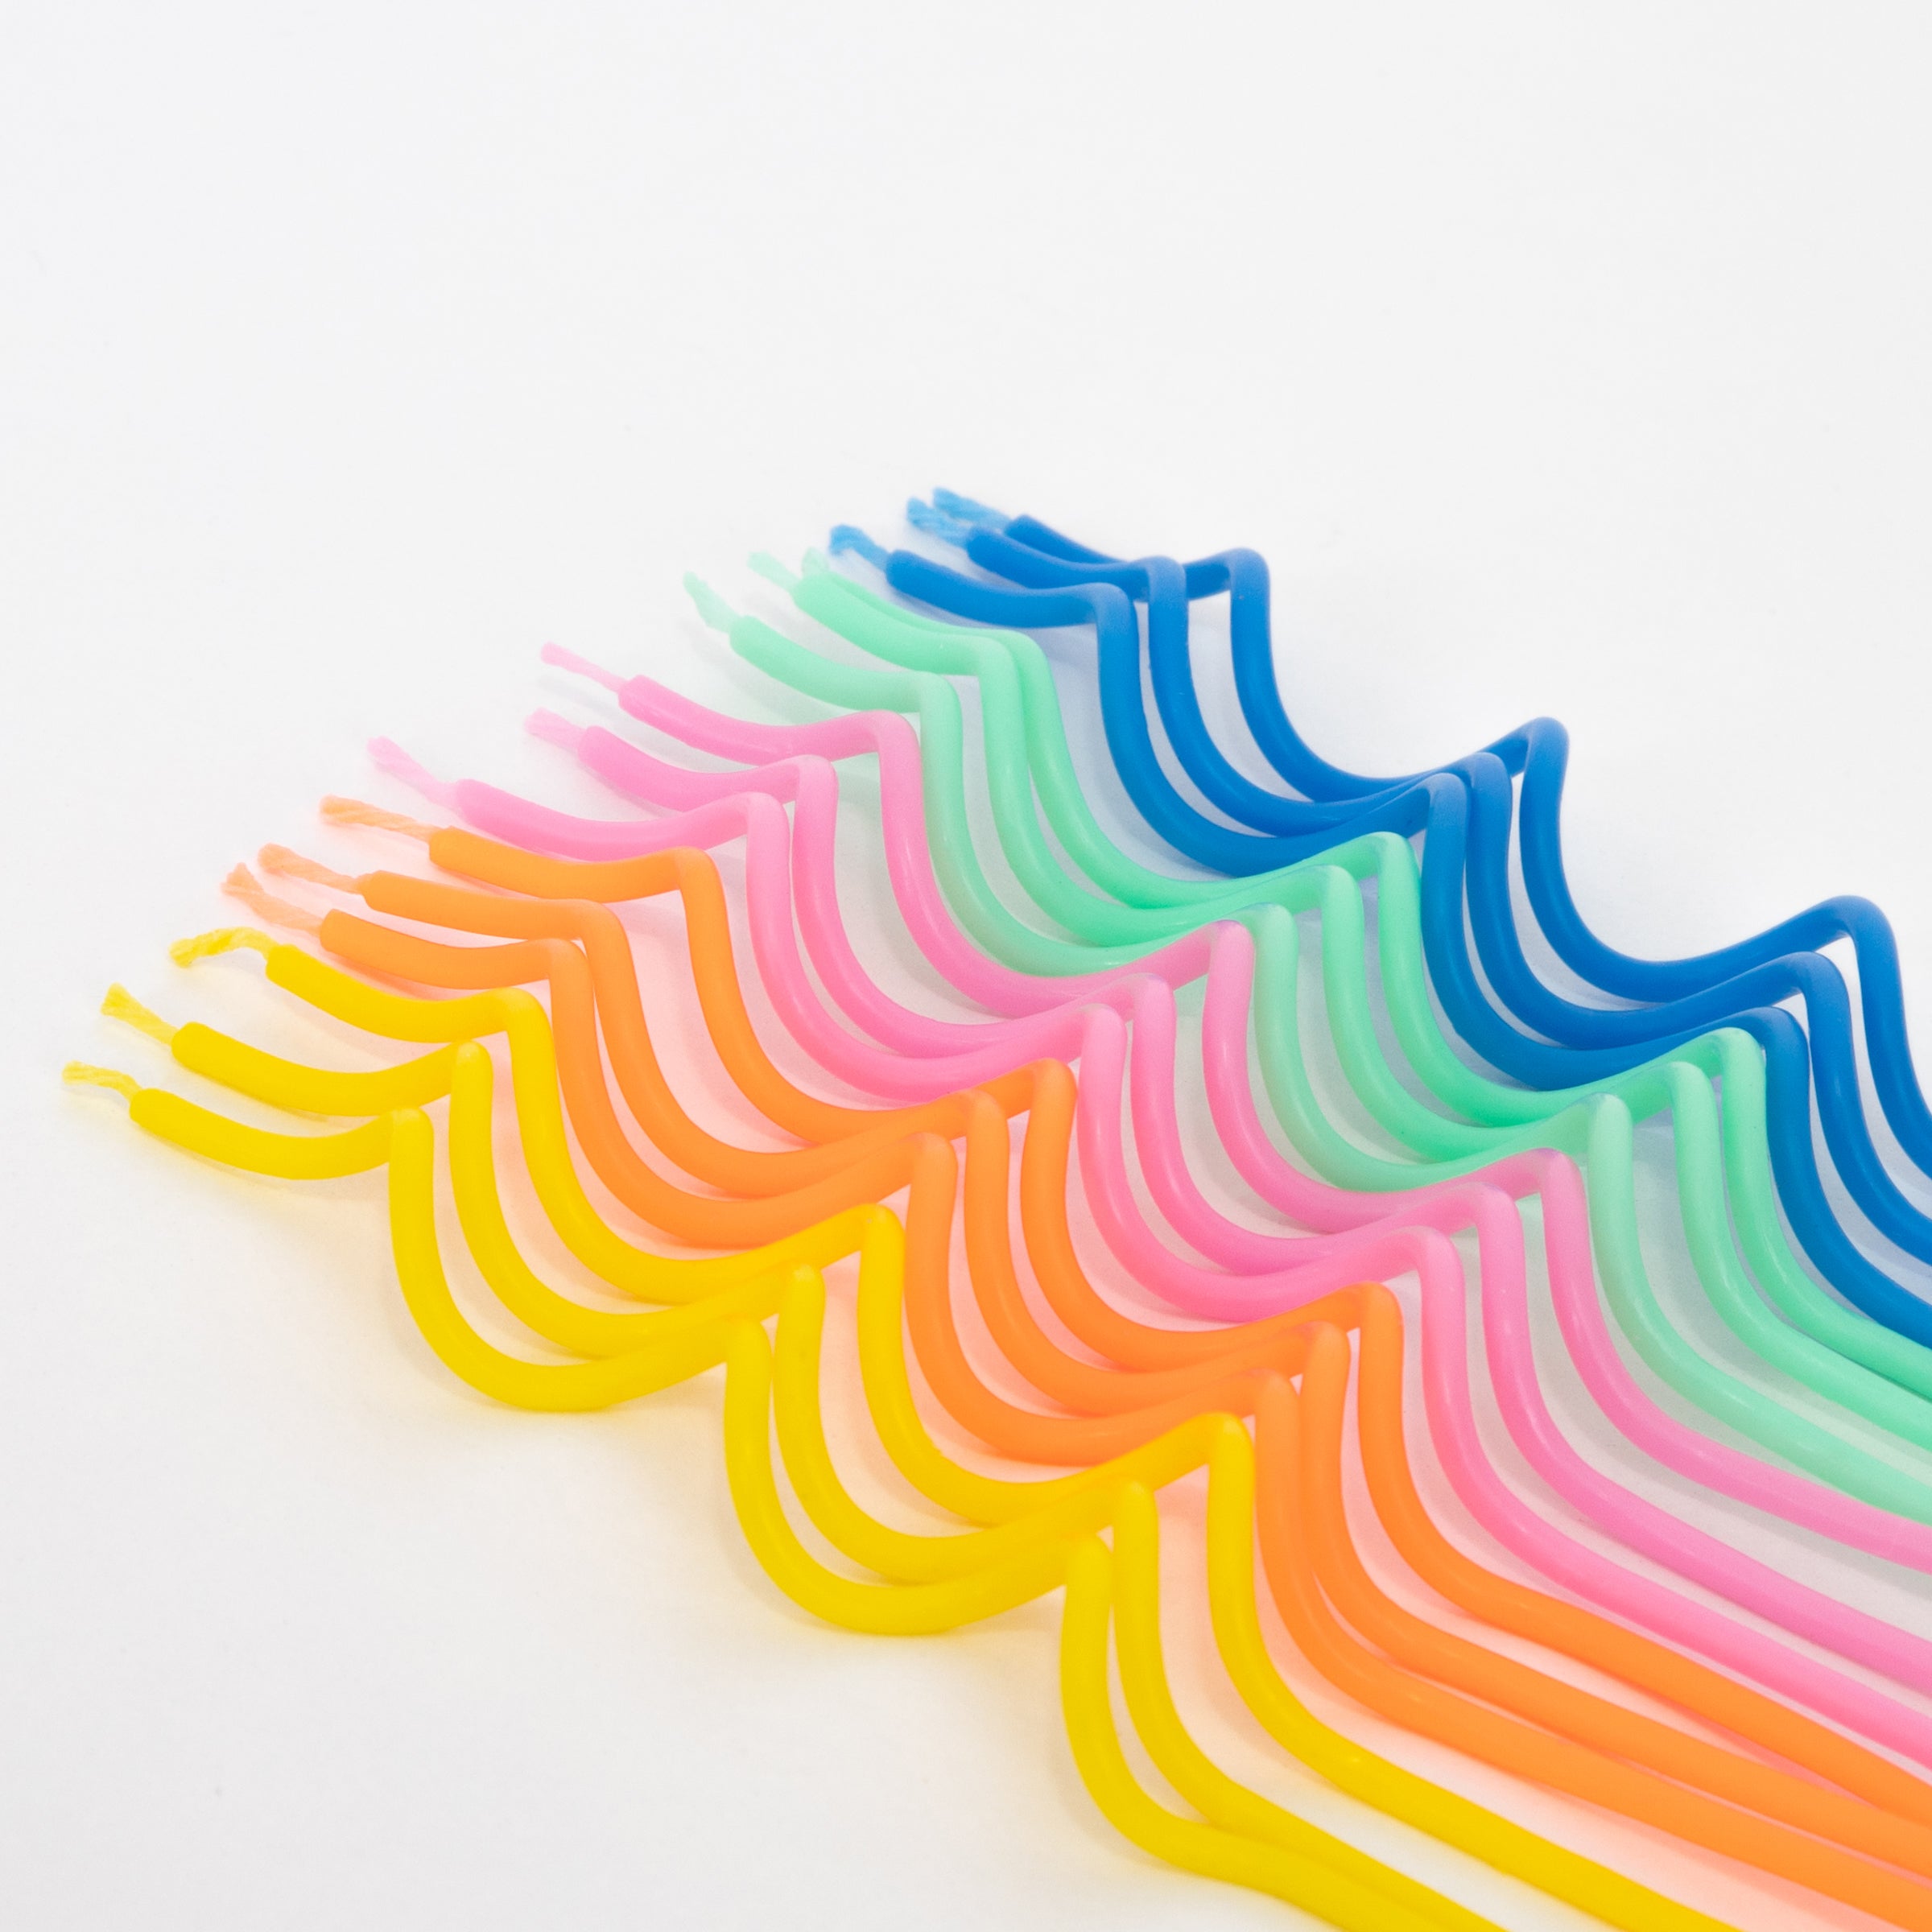 Our tall candles, with a wavy design, make great birthday cake decorations.